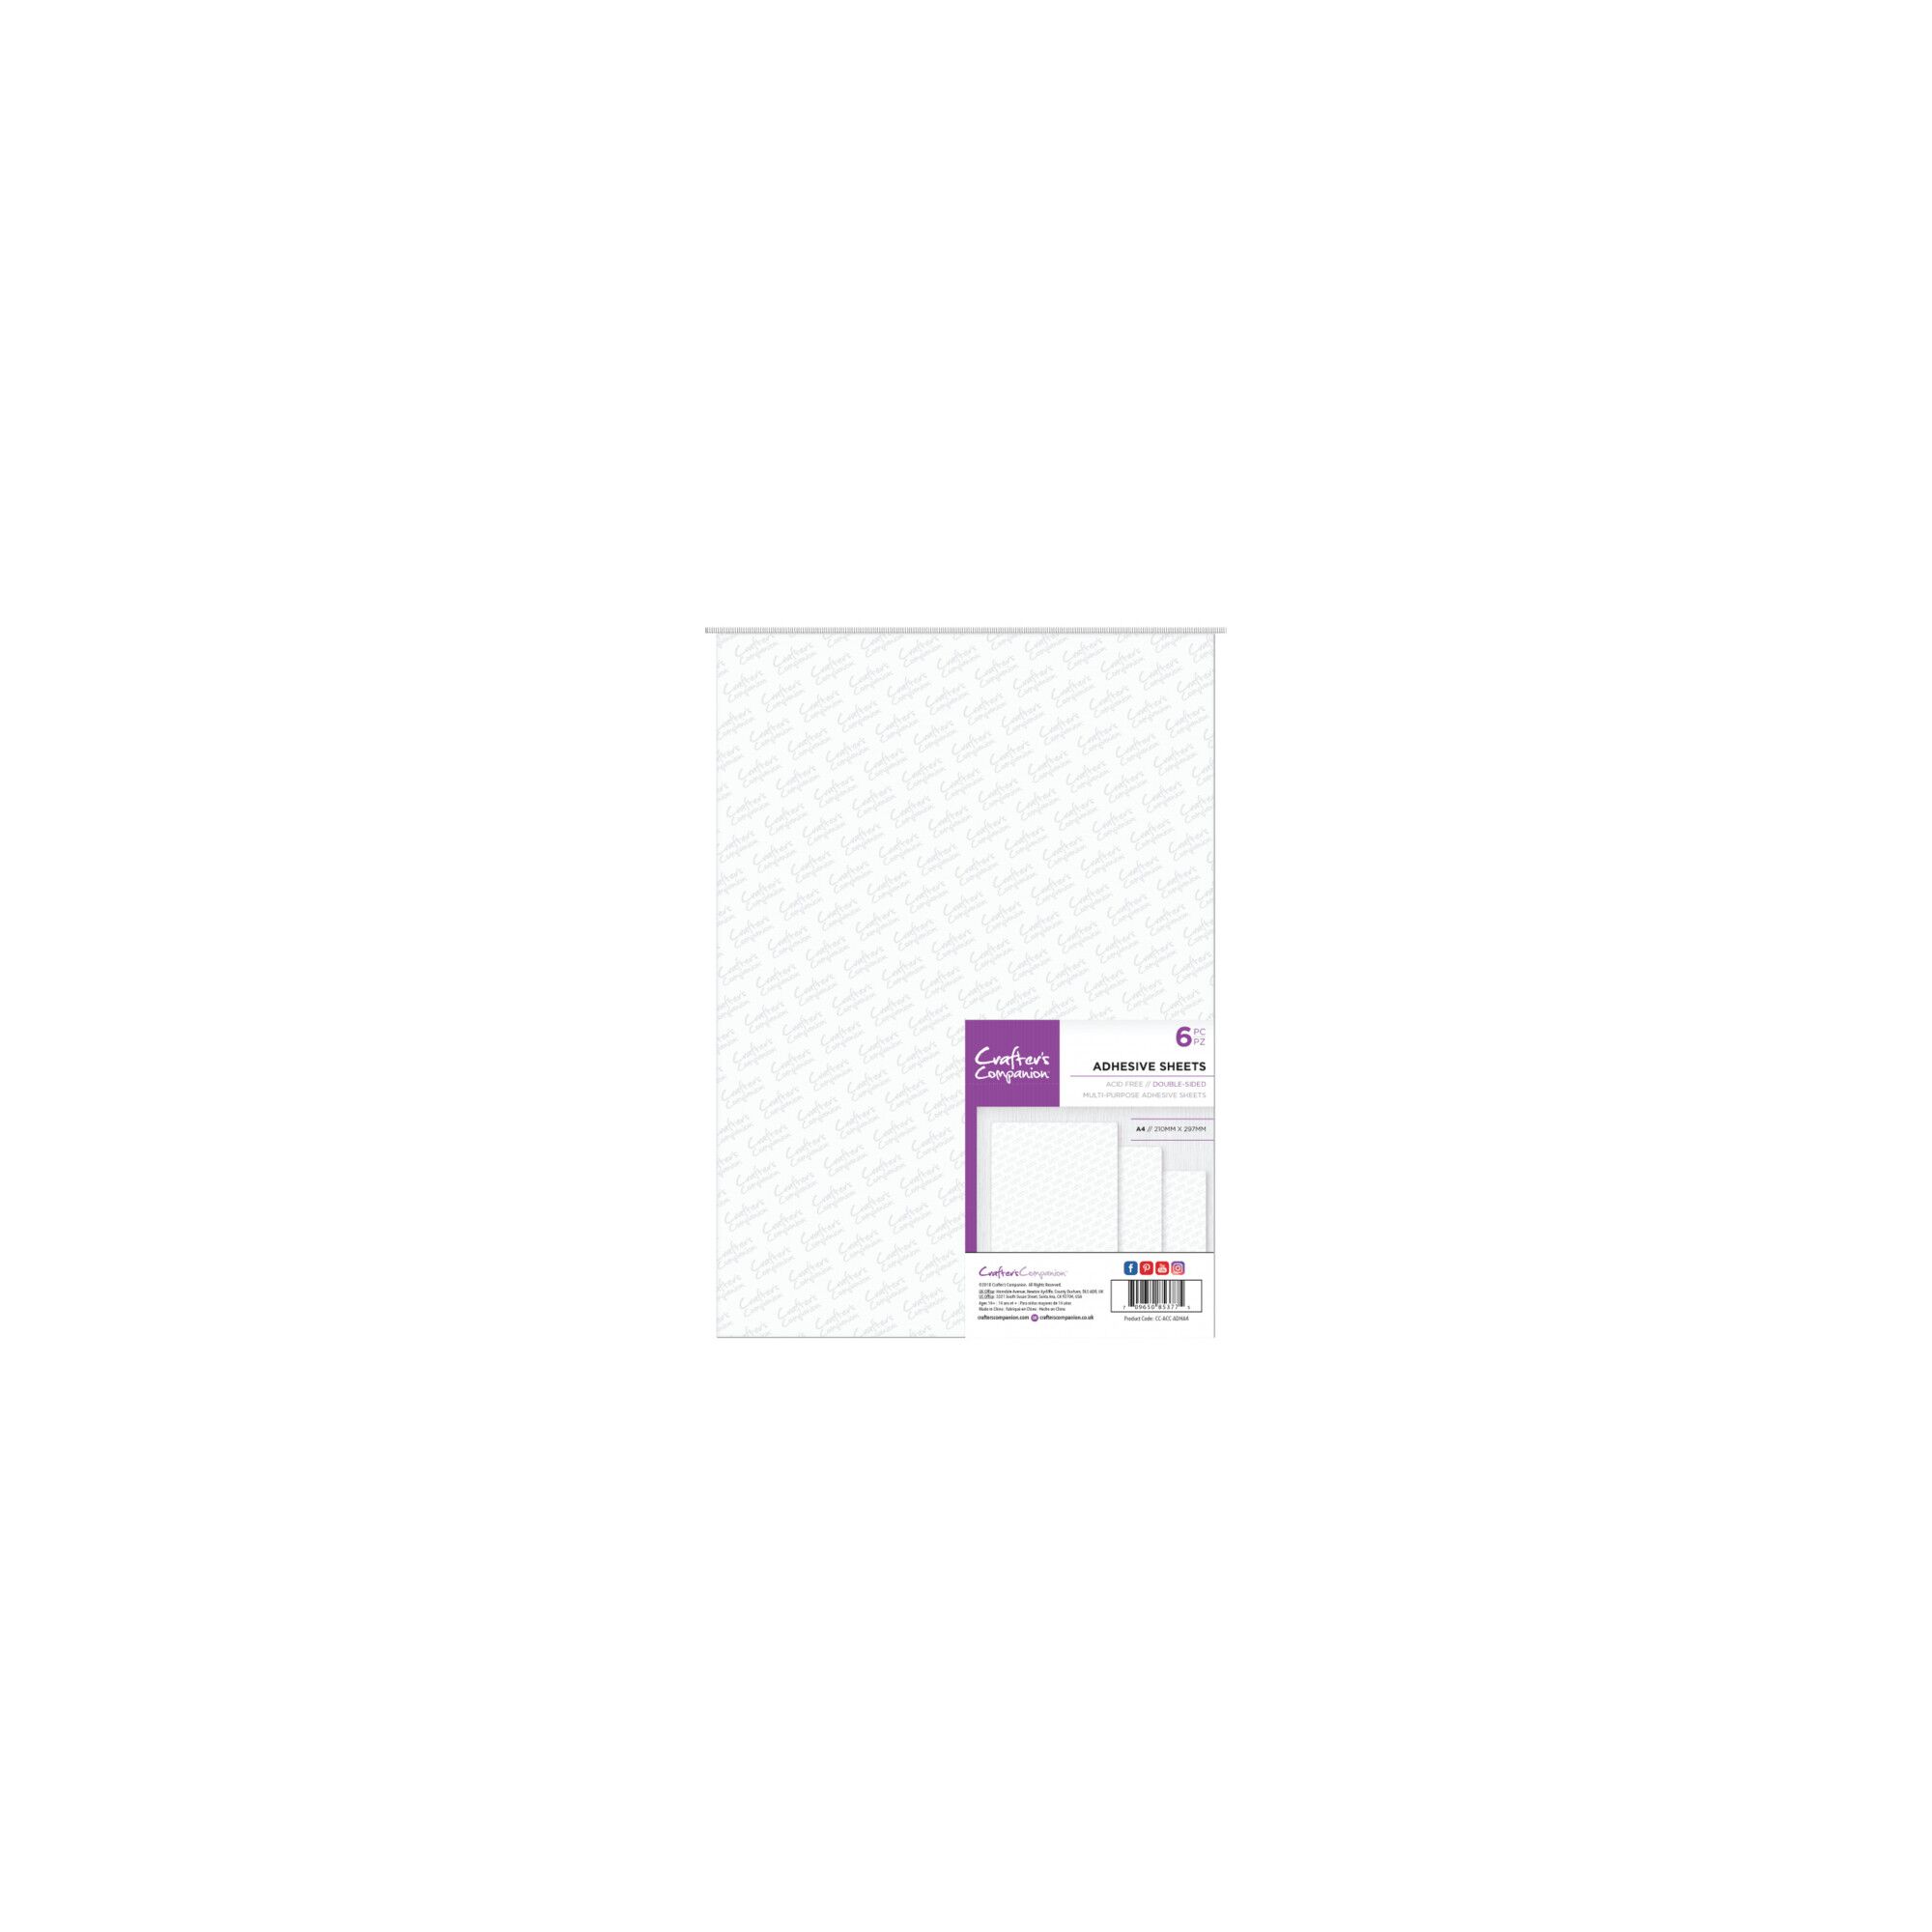 Crafter´s Companion Adhesive Sheets, doppelseitig, 6 Stk. - Digis-and, 7,90  €